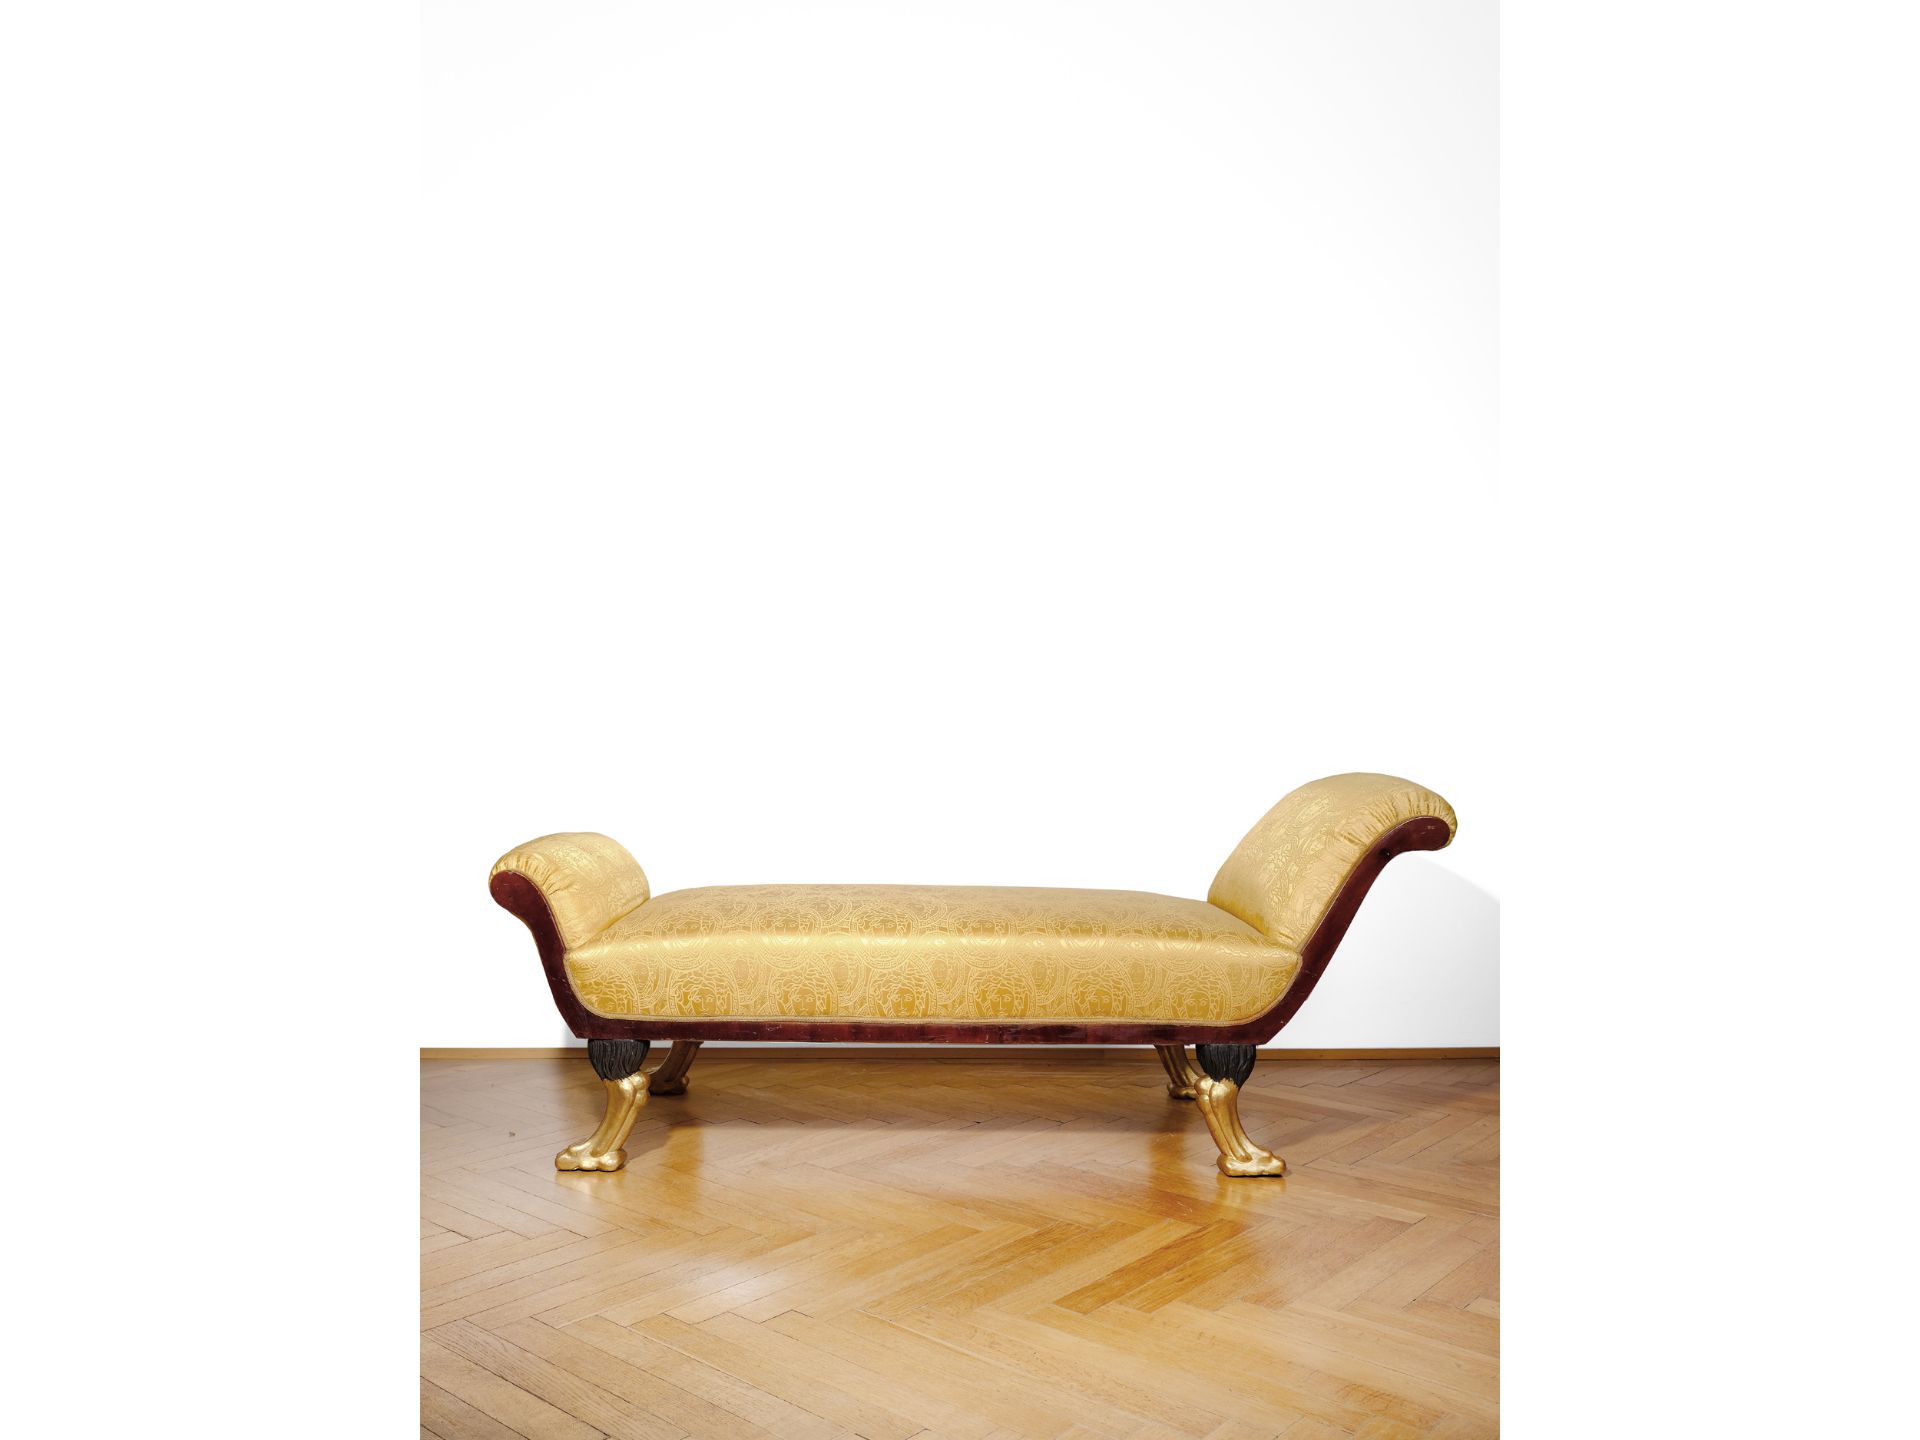 Chaise longue, German or French, Biedermeier - Image 2 of 4